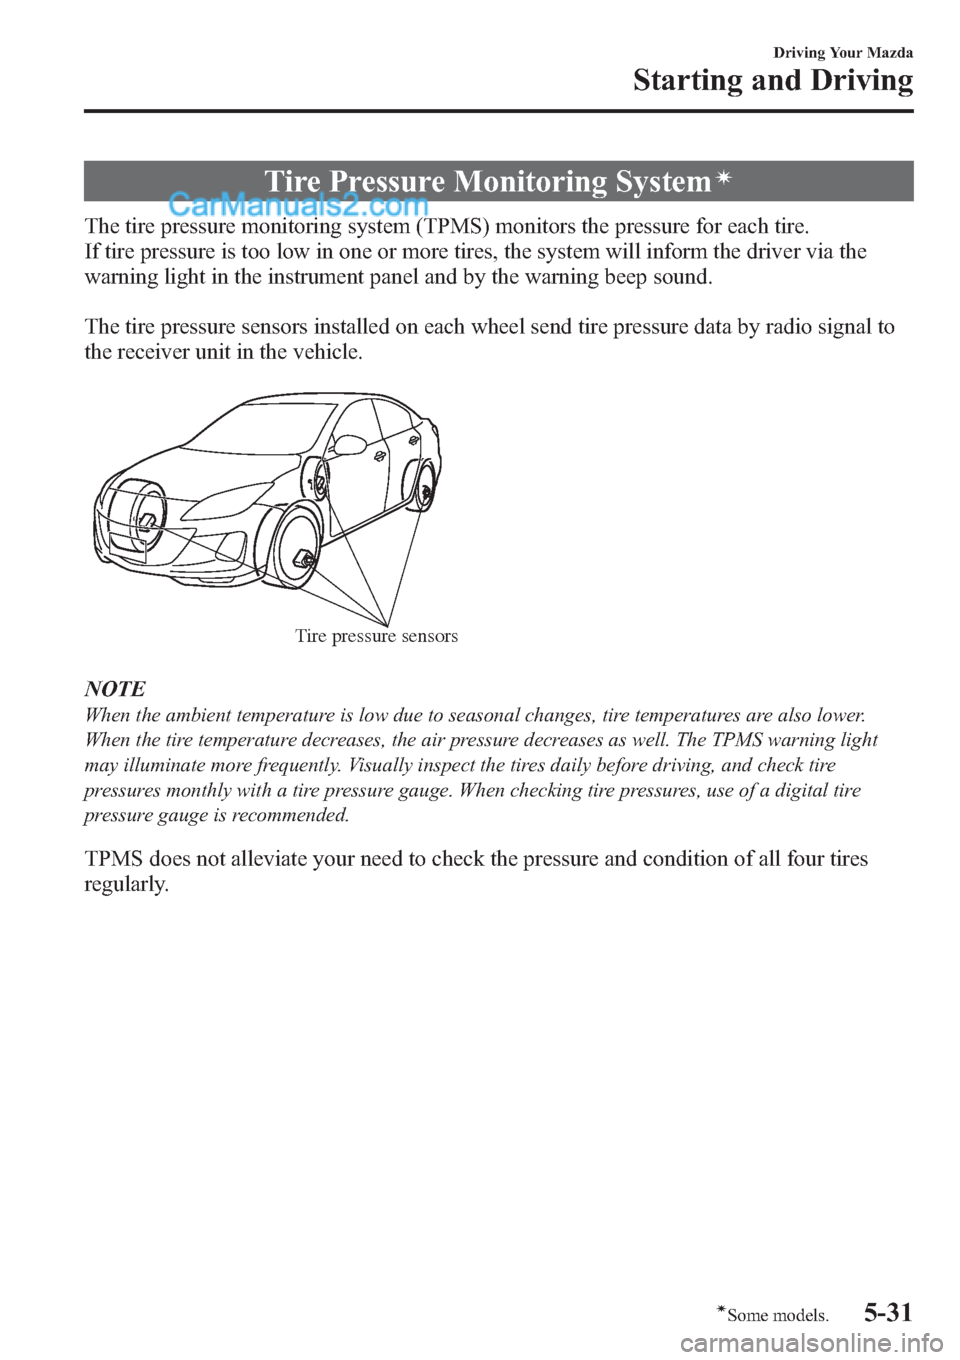 MAZDA MODEL MAZDASPEED 3 2013  Owners Manual (in English) Tire Pressure Monitoring Systemí
The tire pressure monitoring system (TPMS) monitors the pressure for each tire.
If tire pressure is too low in one or more tires, the system will inform the driver vi